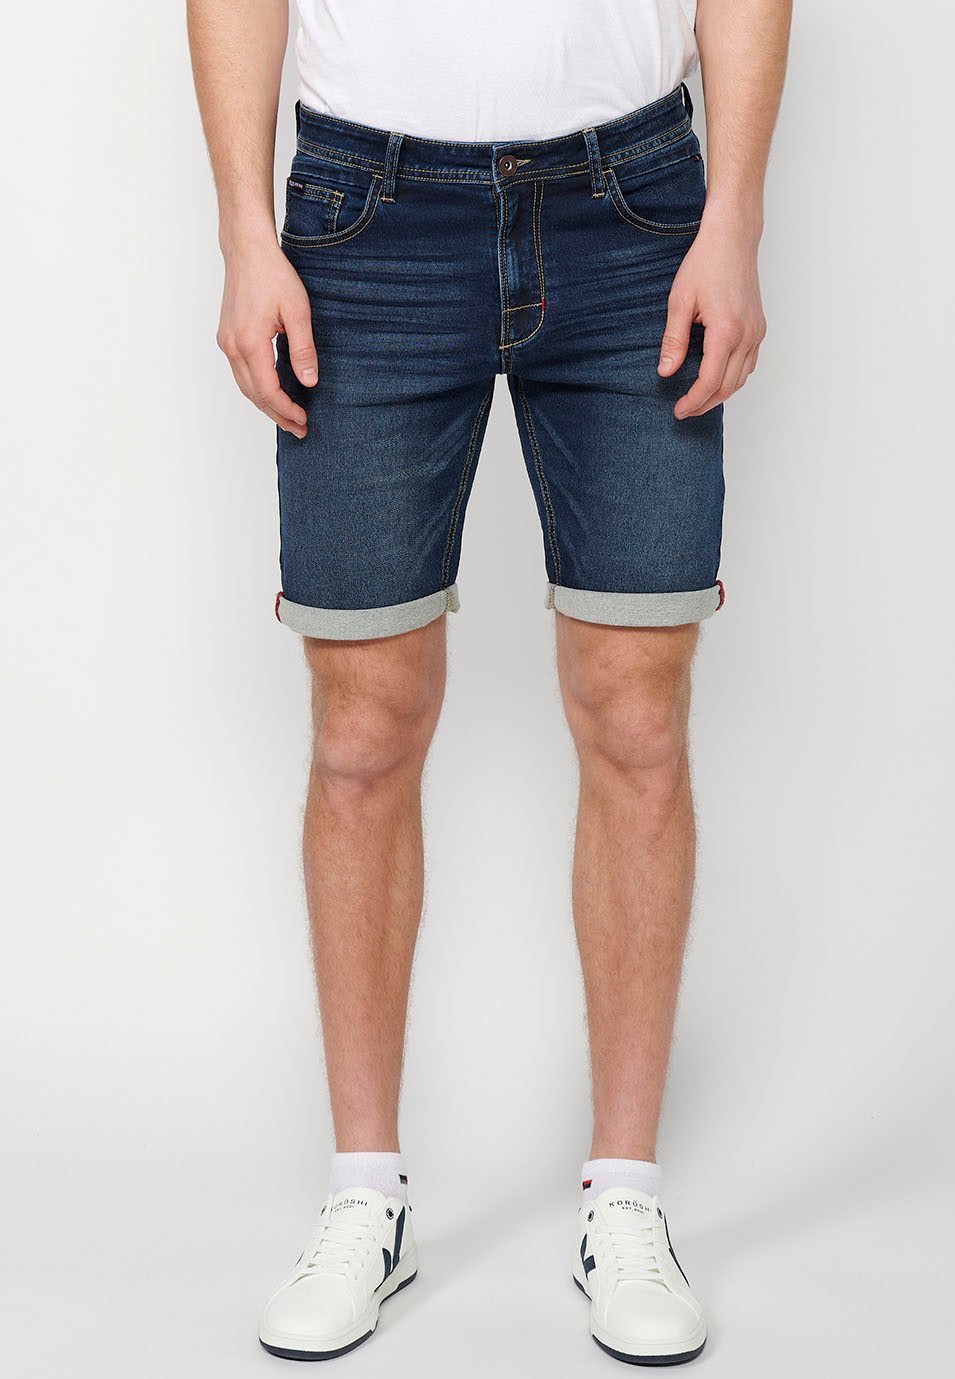 Shorts with turn-up finish with front closure with zipper and button in Blue for Men 4